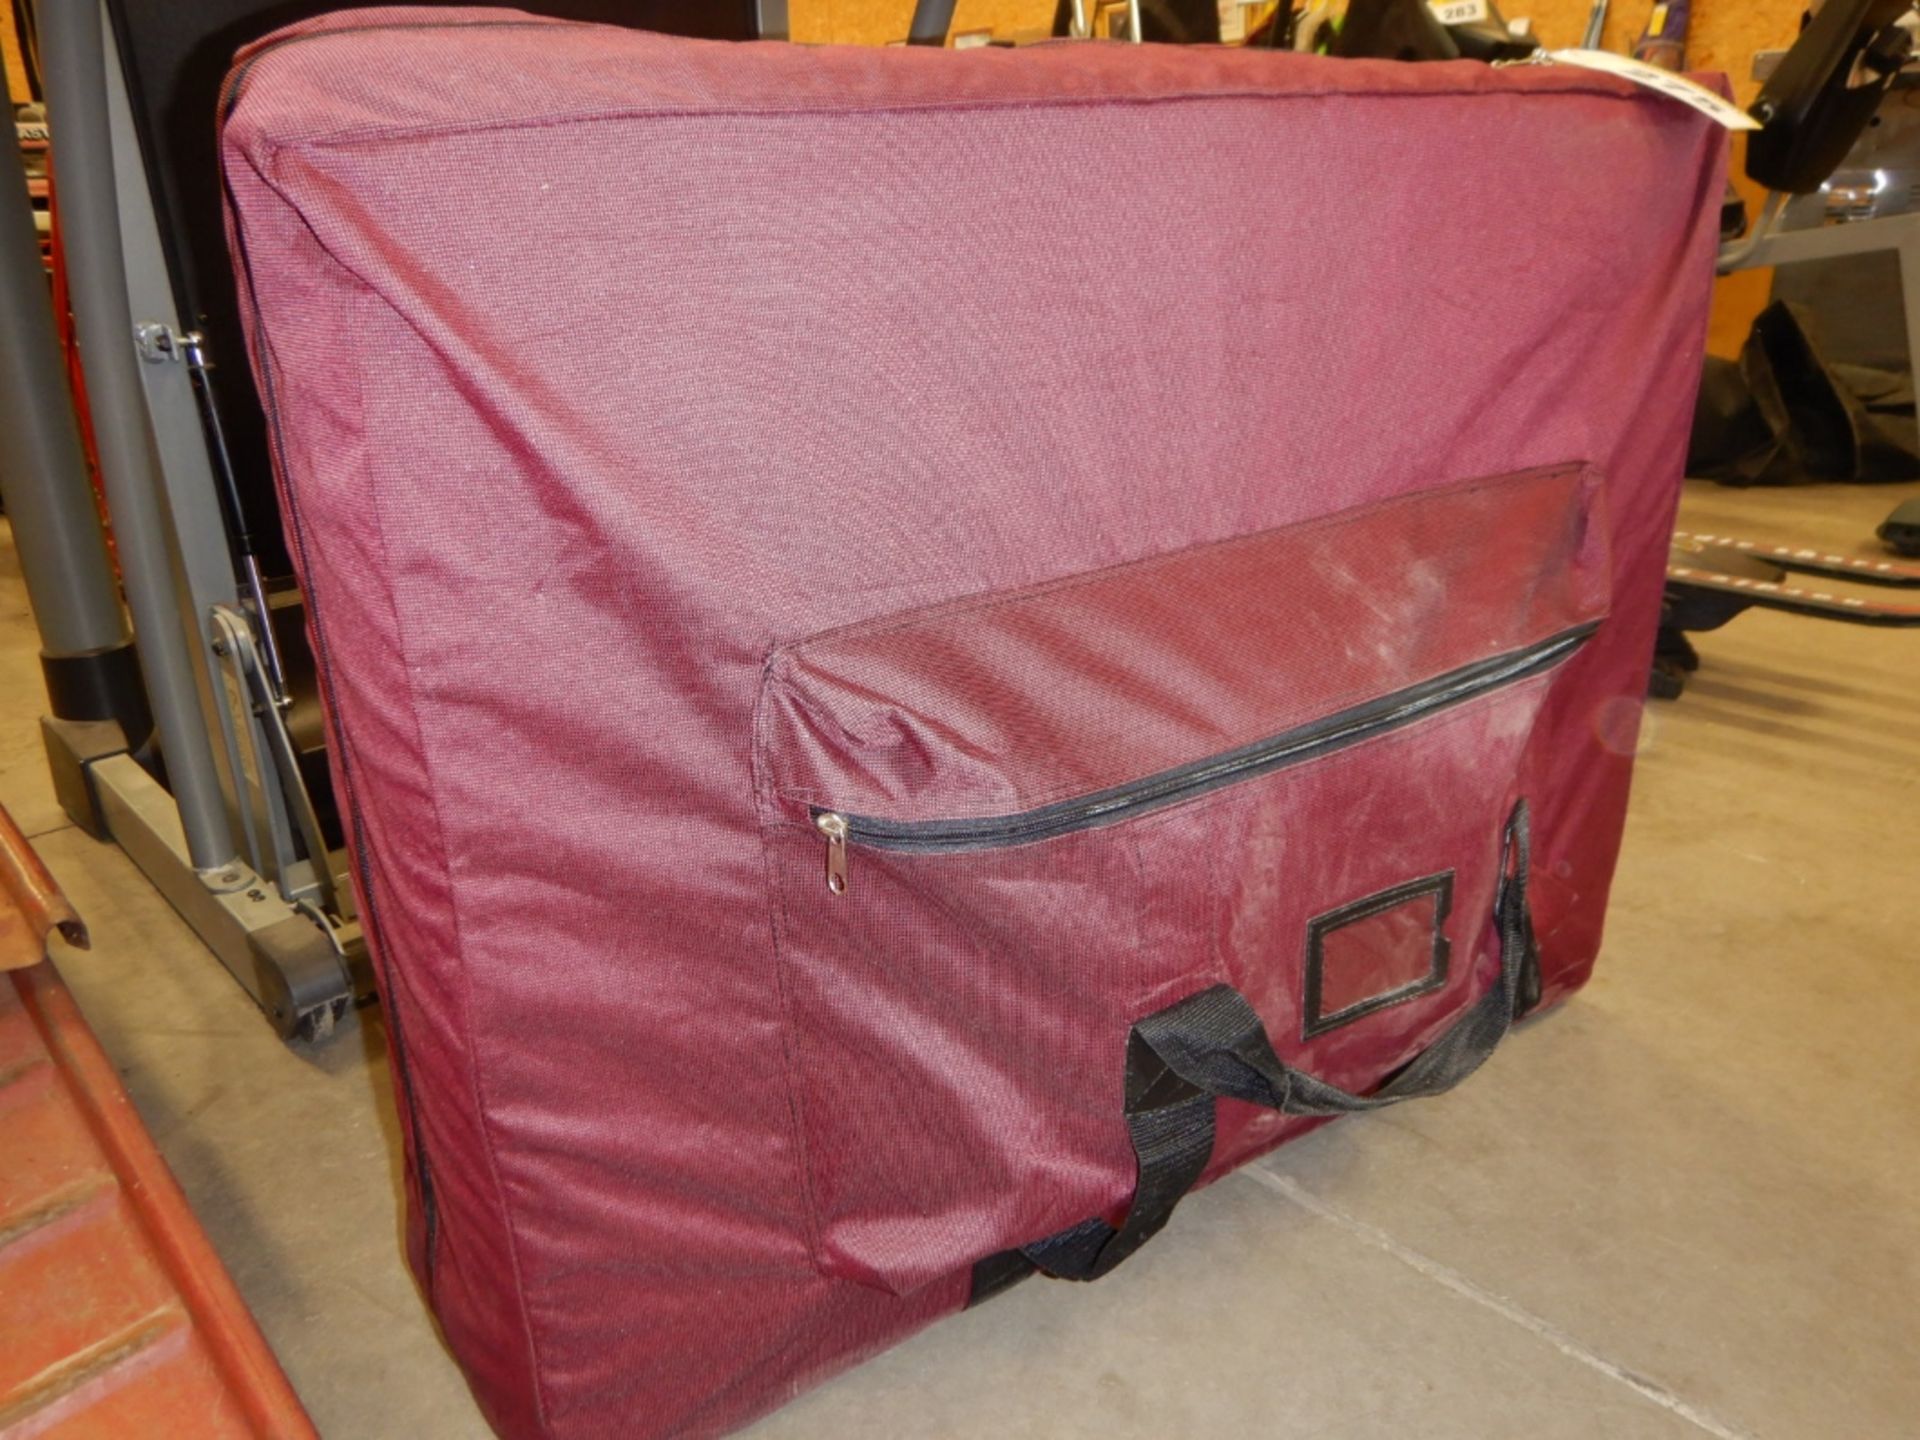 PORTABLE MASSAGE TABLE IN CARRYING CASE